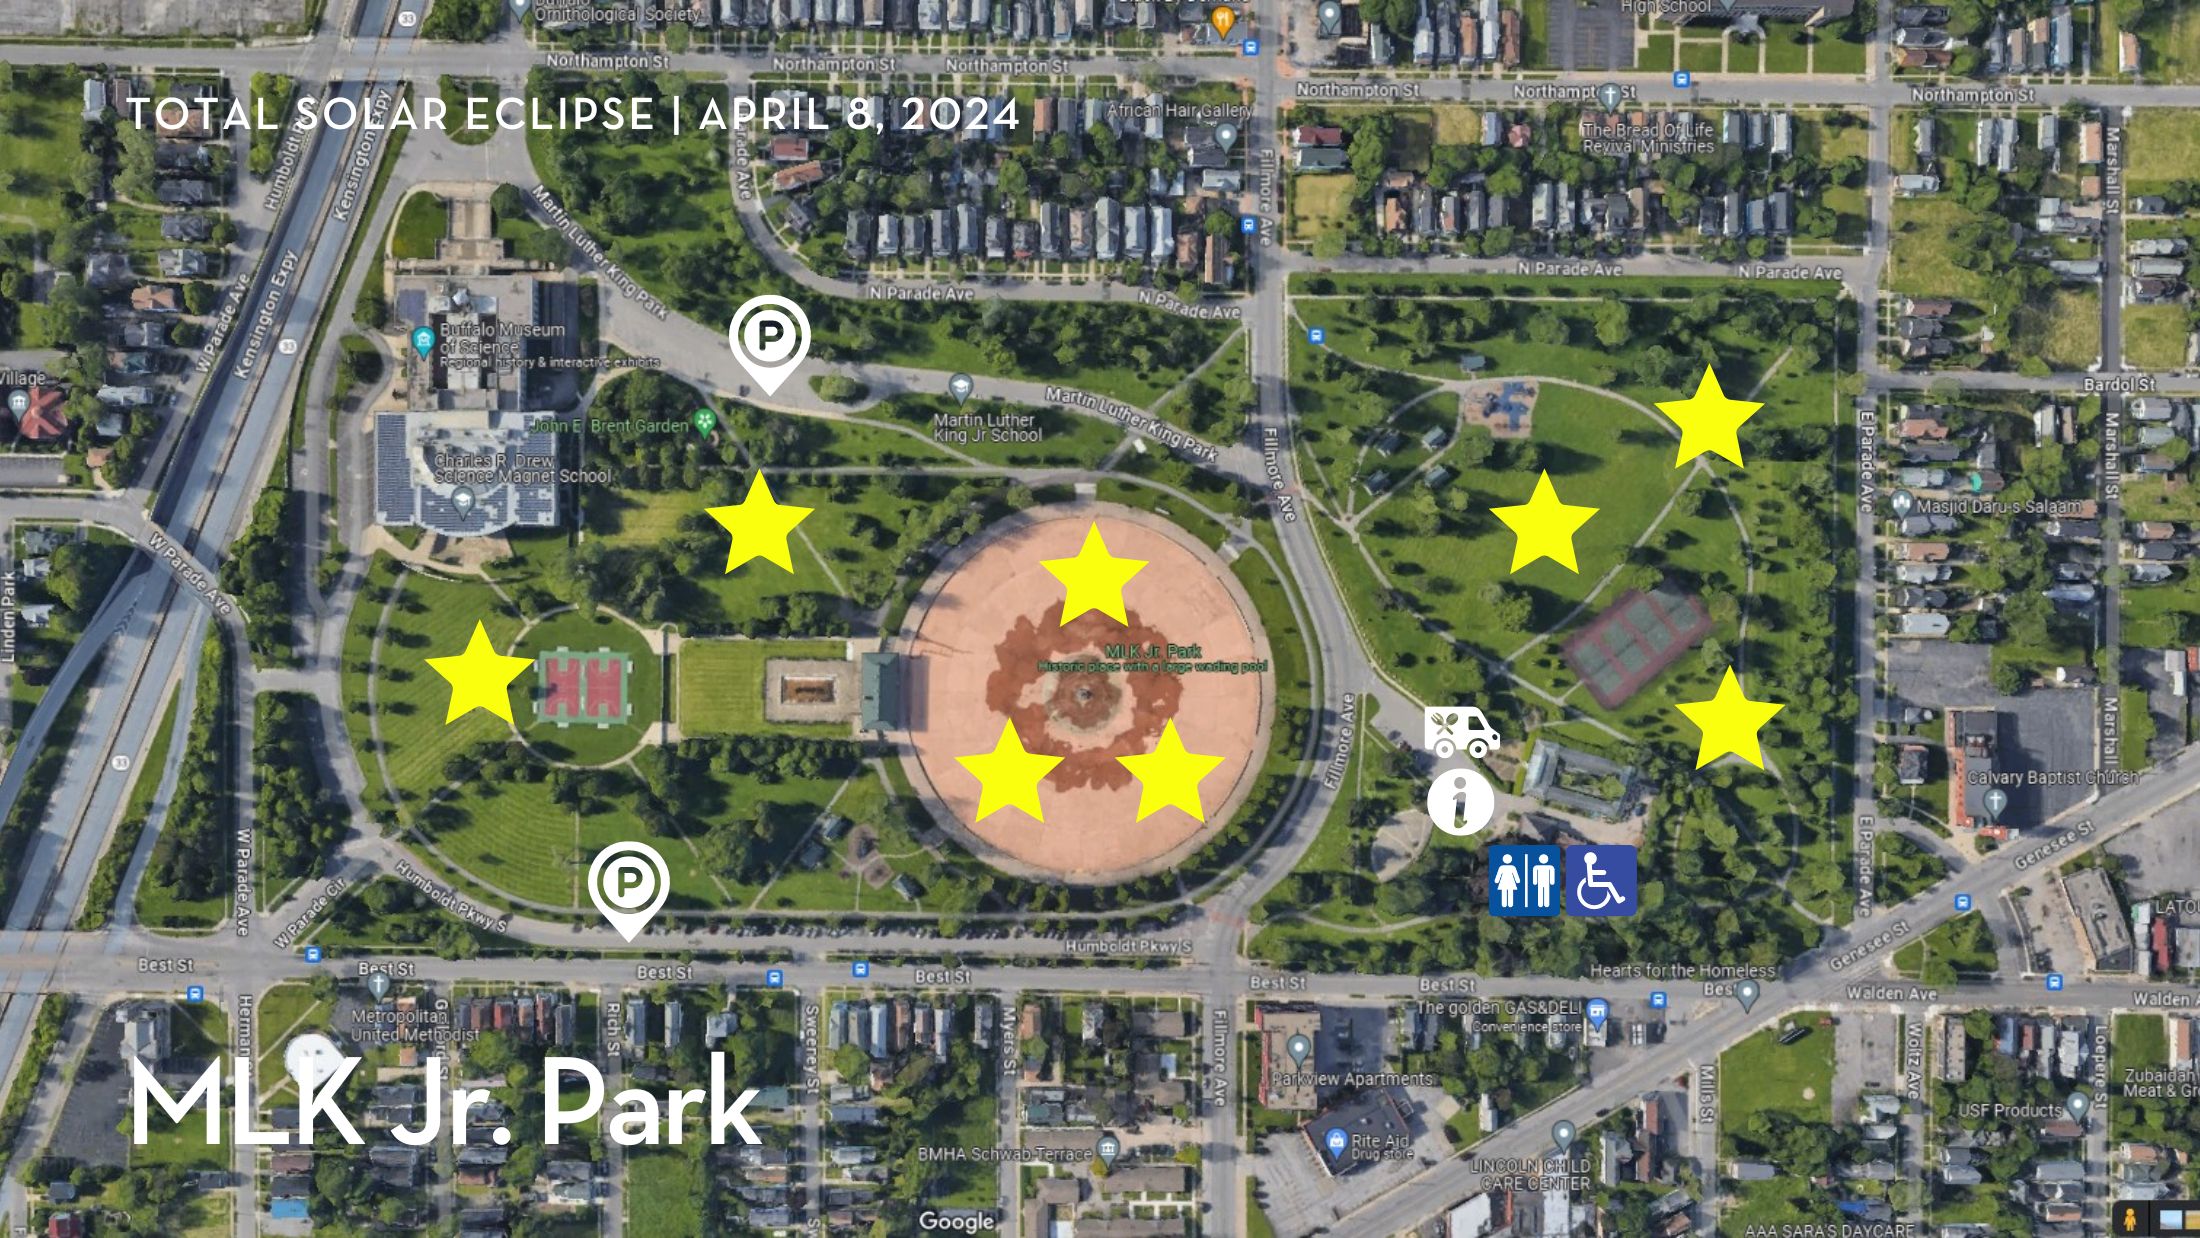 Google maps screenshot of MLK Jr. Park. showing yellow stars designating viewing spots for the Eclipse. Please call 716-495-7880 for more information.